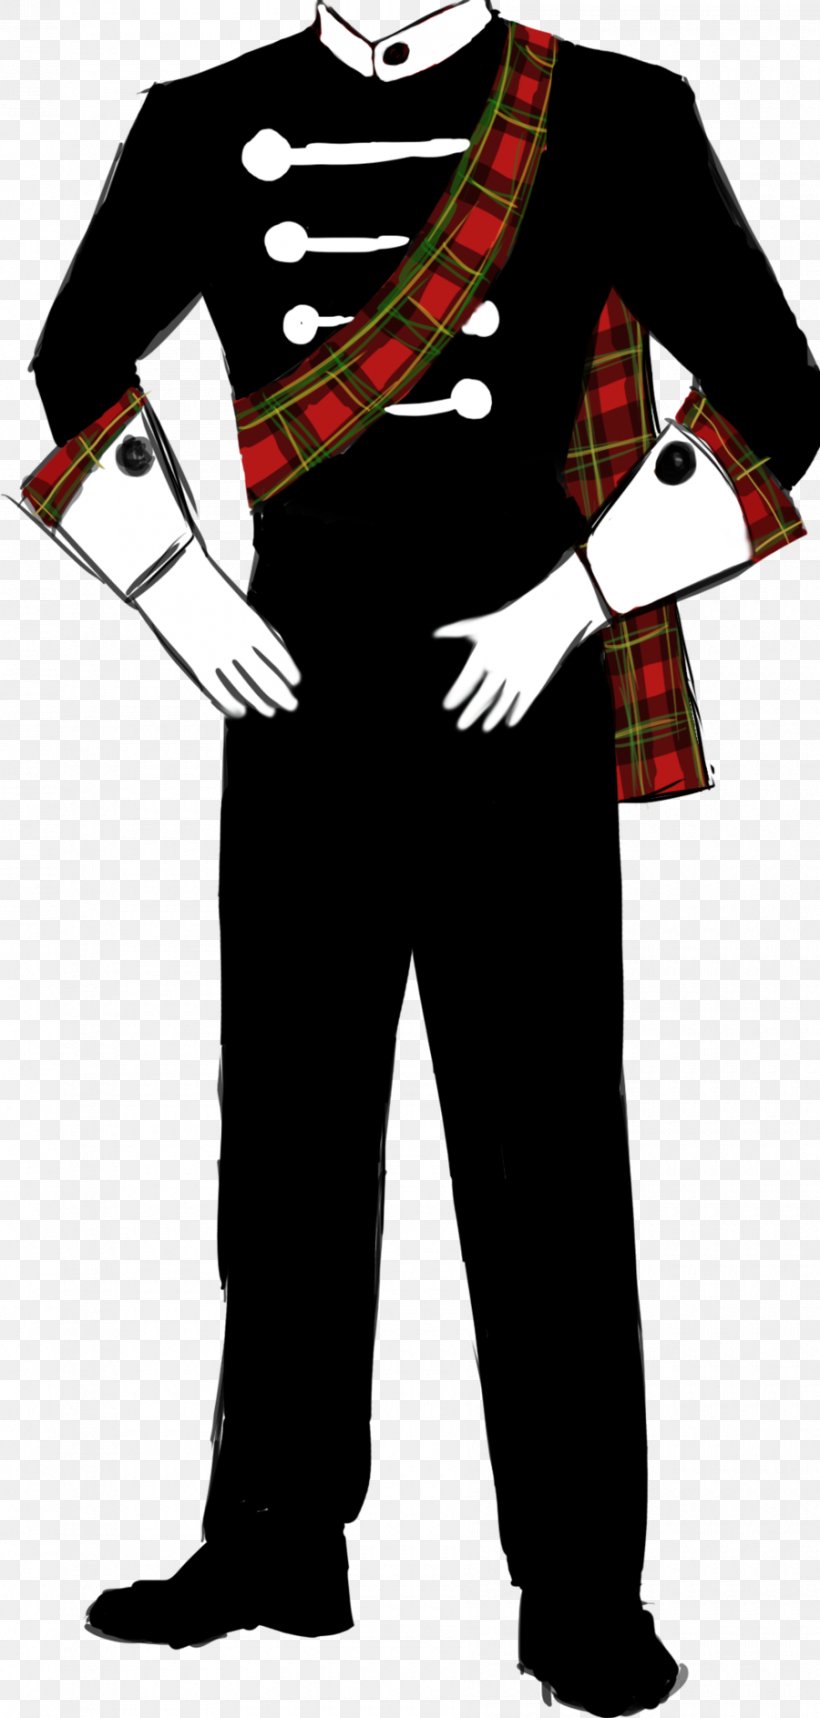 Marching Band Uniform Musical Ensemble Costume Drawing, PNG, 900x1886px, Marching Band, Art, Clothing, Costume, Costume Design Download Free